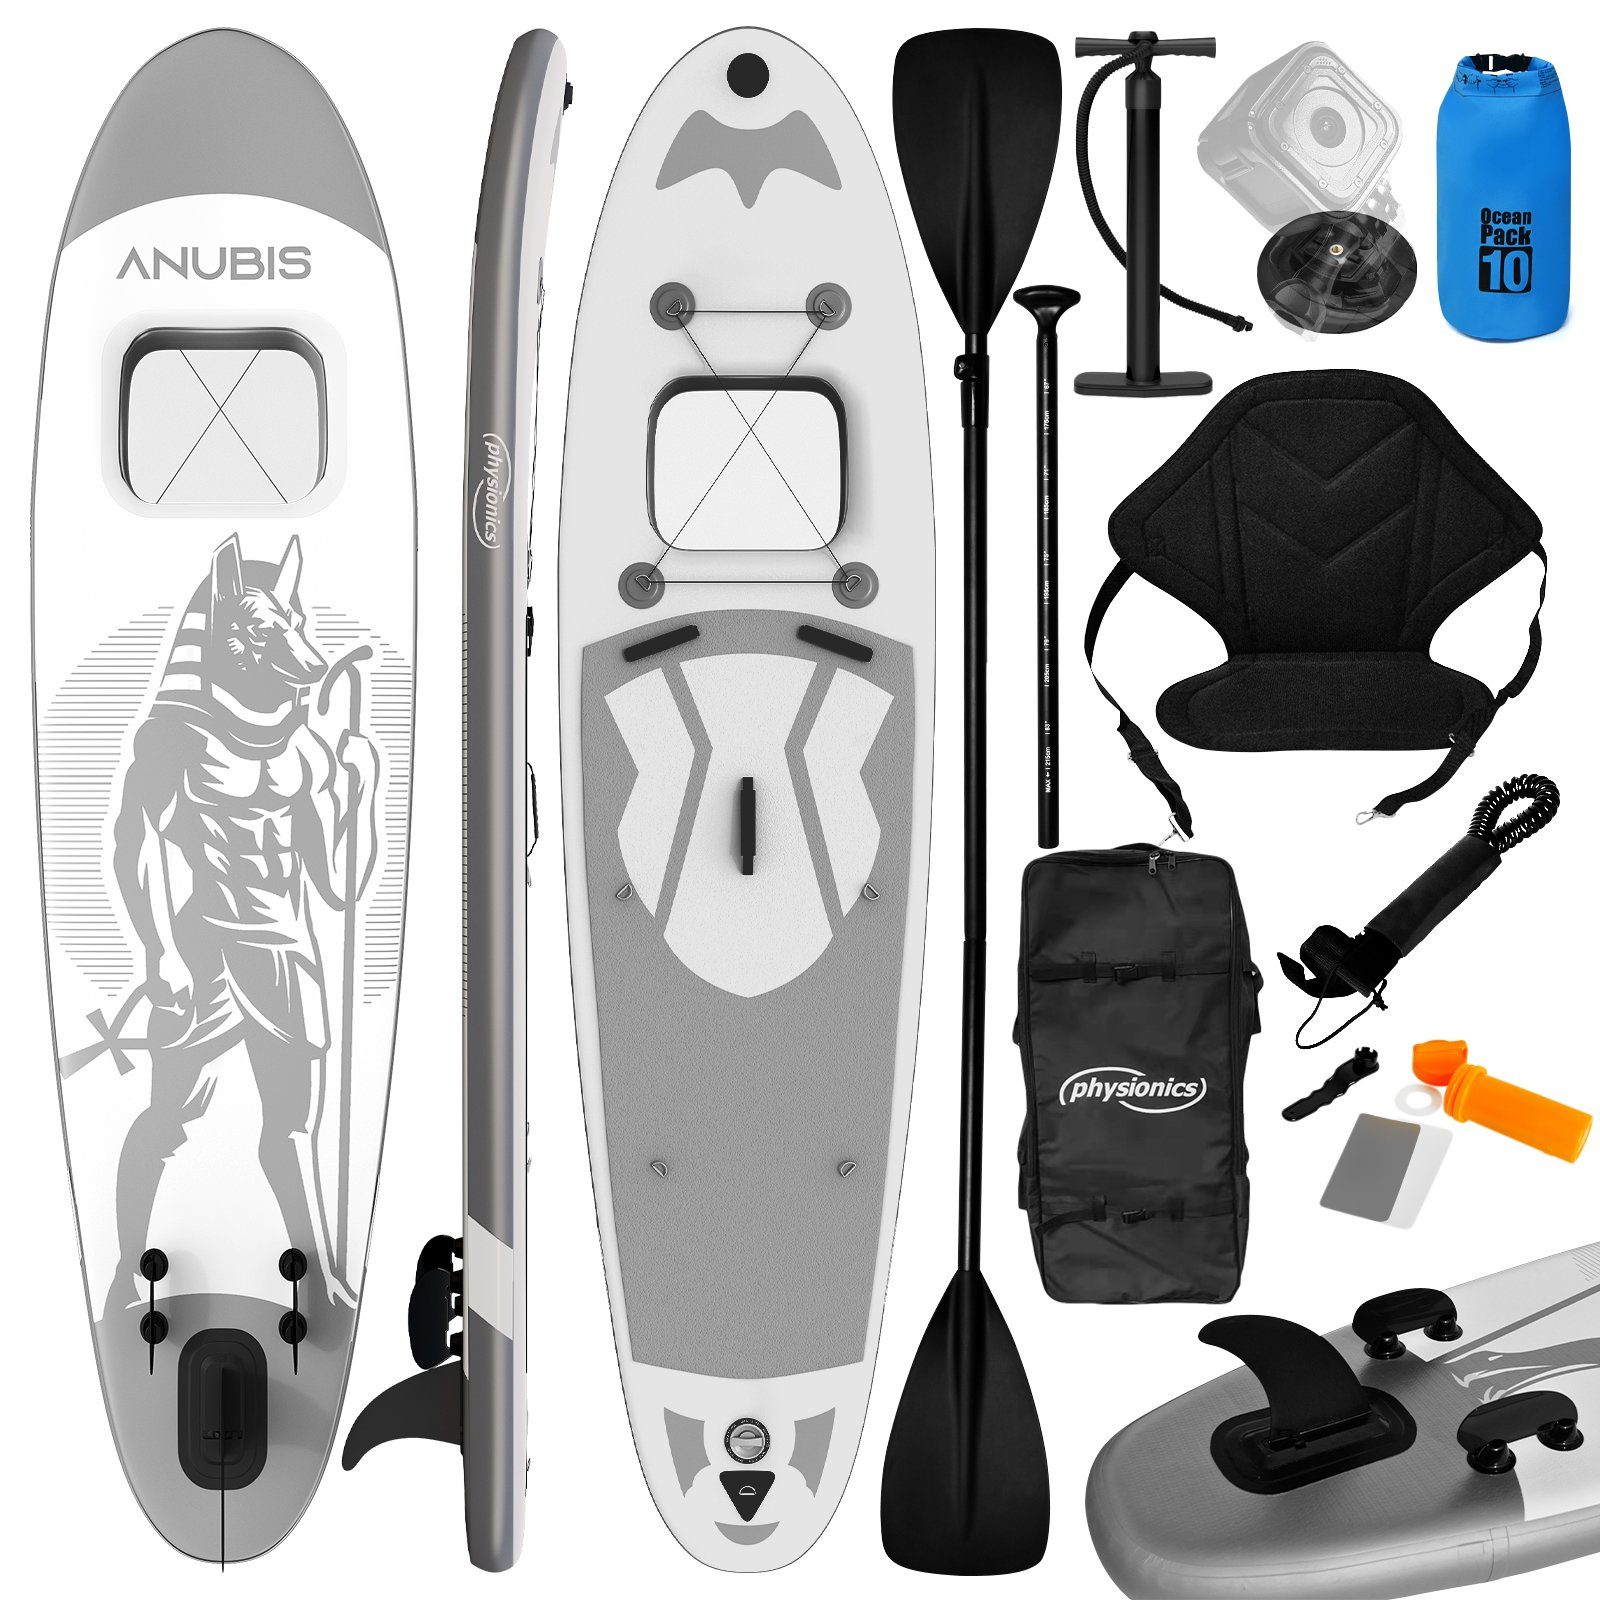 Physionics SUP-Board Stand Up Paddle Board Aufblasbares SUP Board 320cm Anubis(Silber)